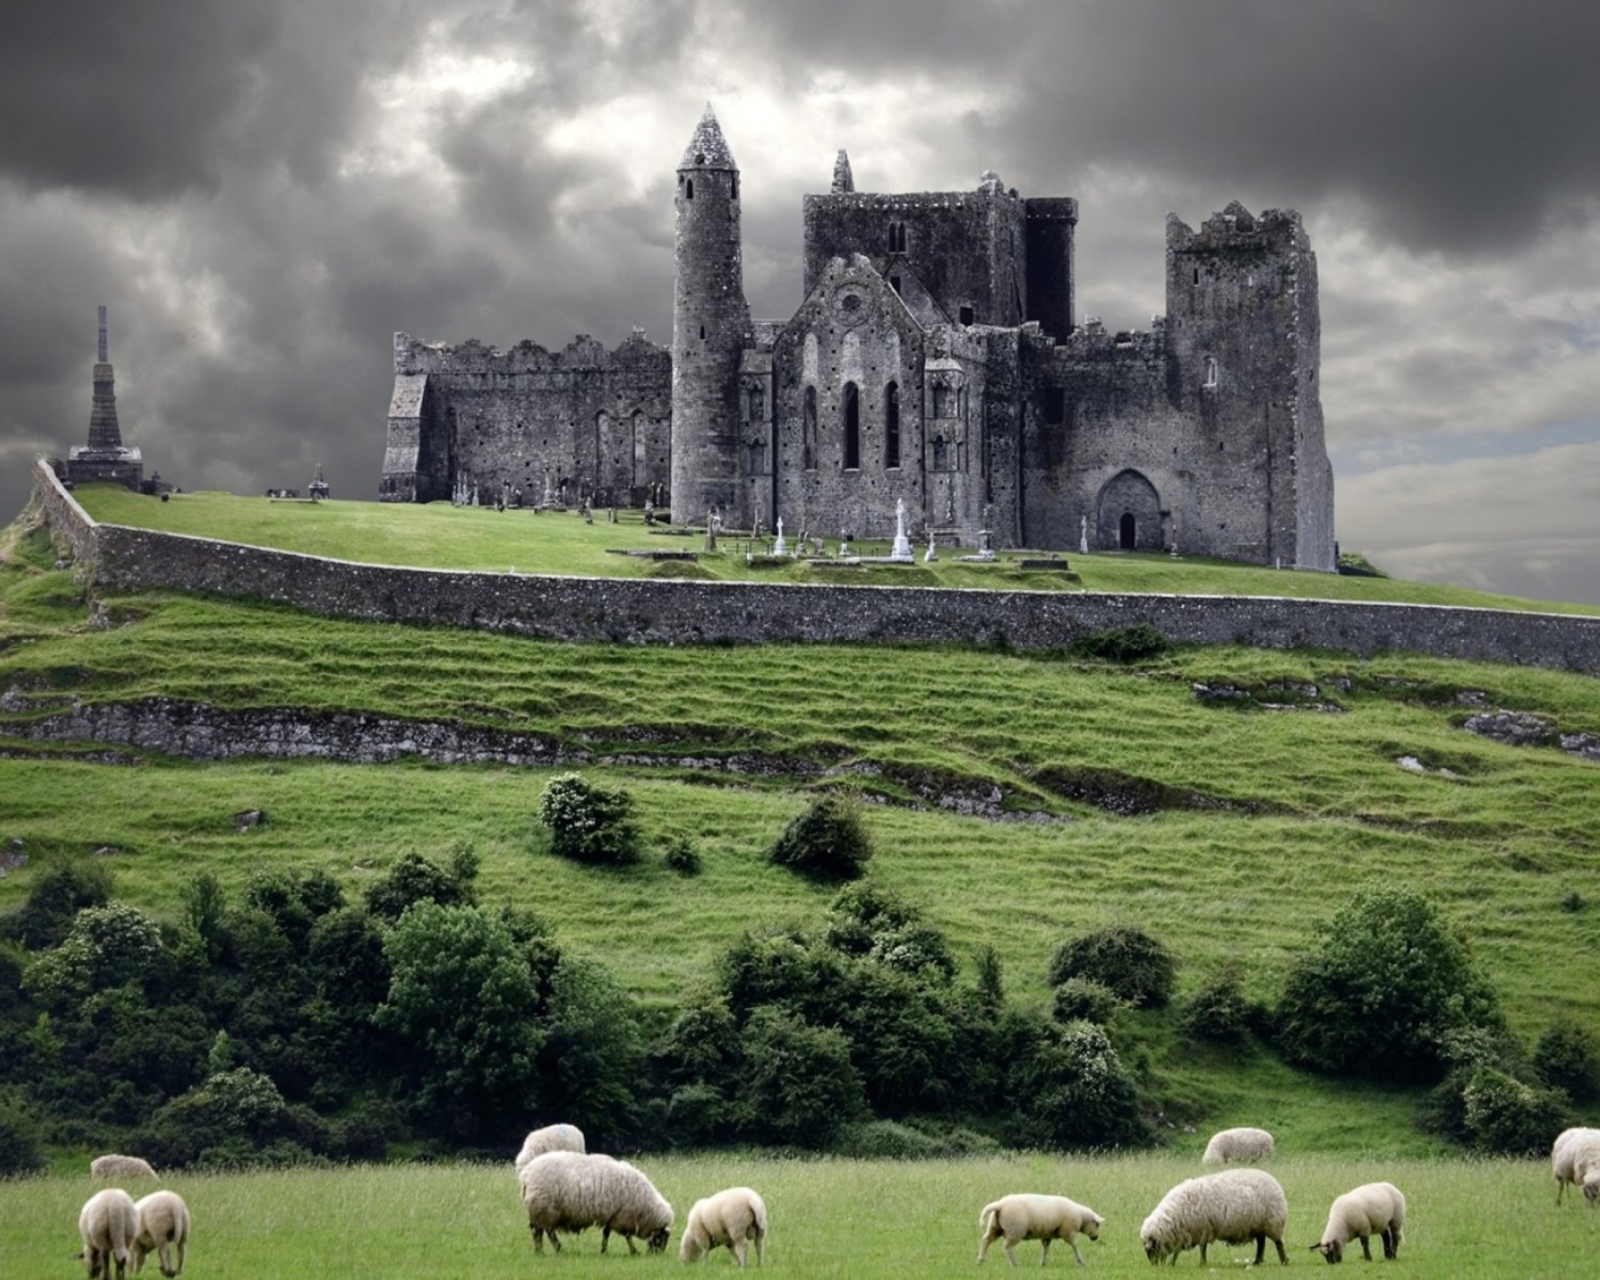 Das Ireland Landscape With Sheep And Castle Wallpaper 1600x1280